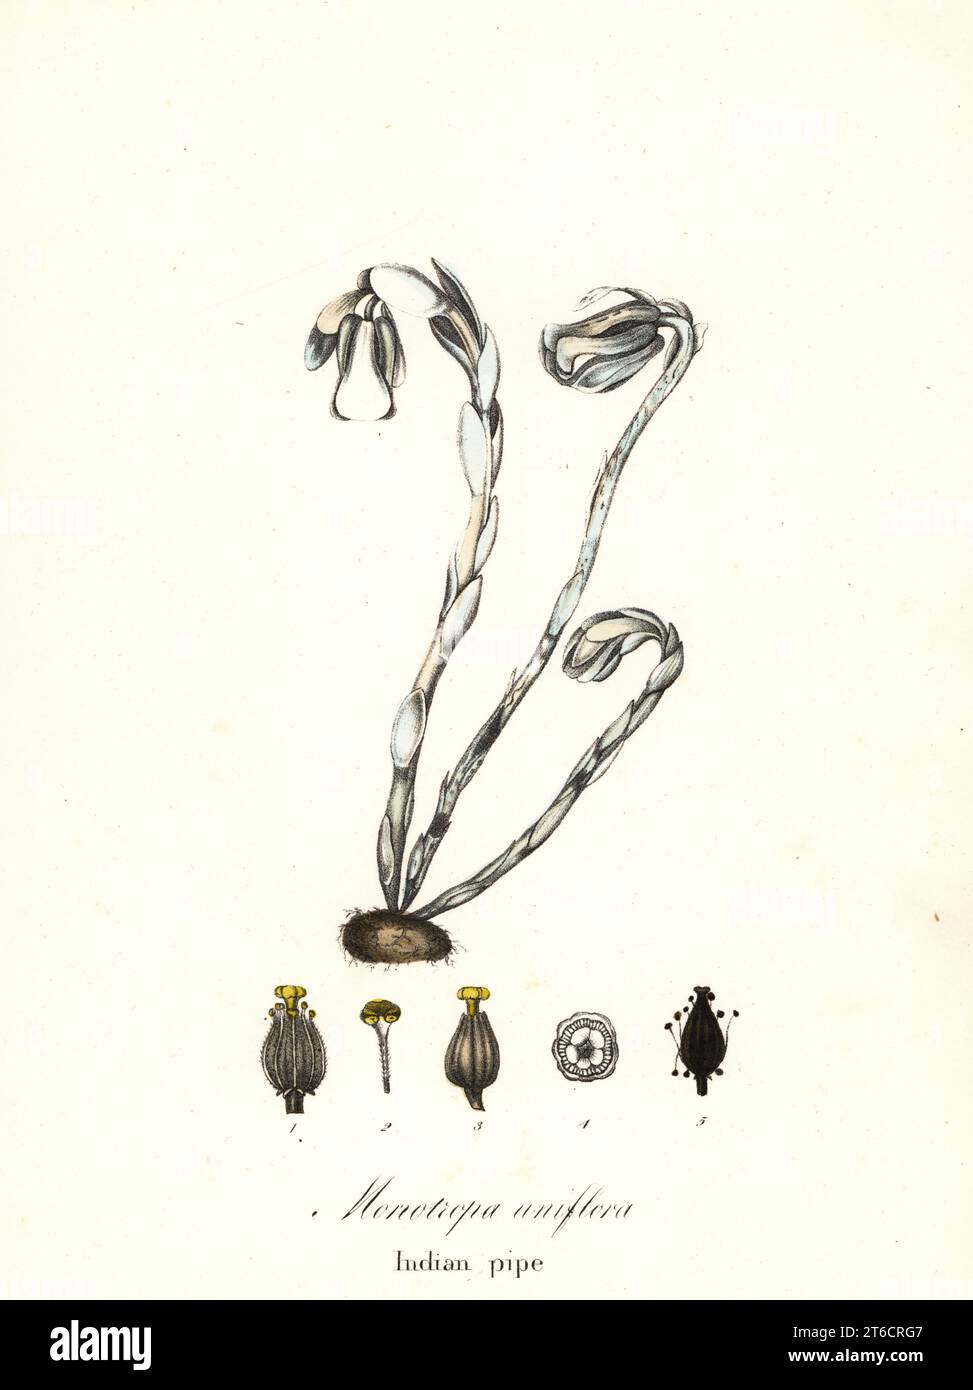 Ghost plant, ghost pipe, Indian pipe or corpse plant, Monotiopa uniflora. Handcoloured lithograph by Endicott after a botanical illustration from John Torreys A Flora of the State of New York, Carroll and Cook, Albany, 1843. The plates drawn by John Torrey, Agnes Mitchell, Elizabeth Paoley and Swinton. John Torrey was an American botanist, chemist and physician 1796-1873. Stock Photo